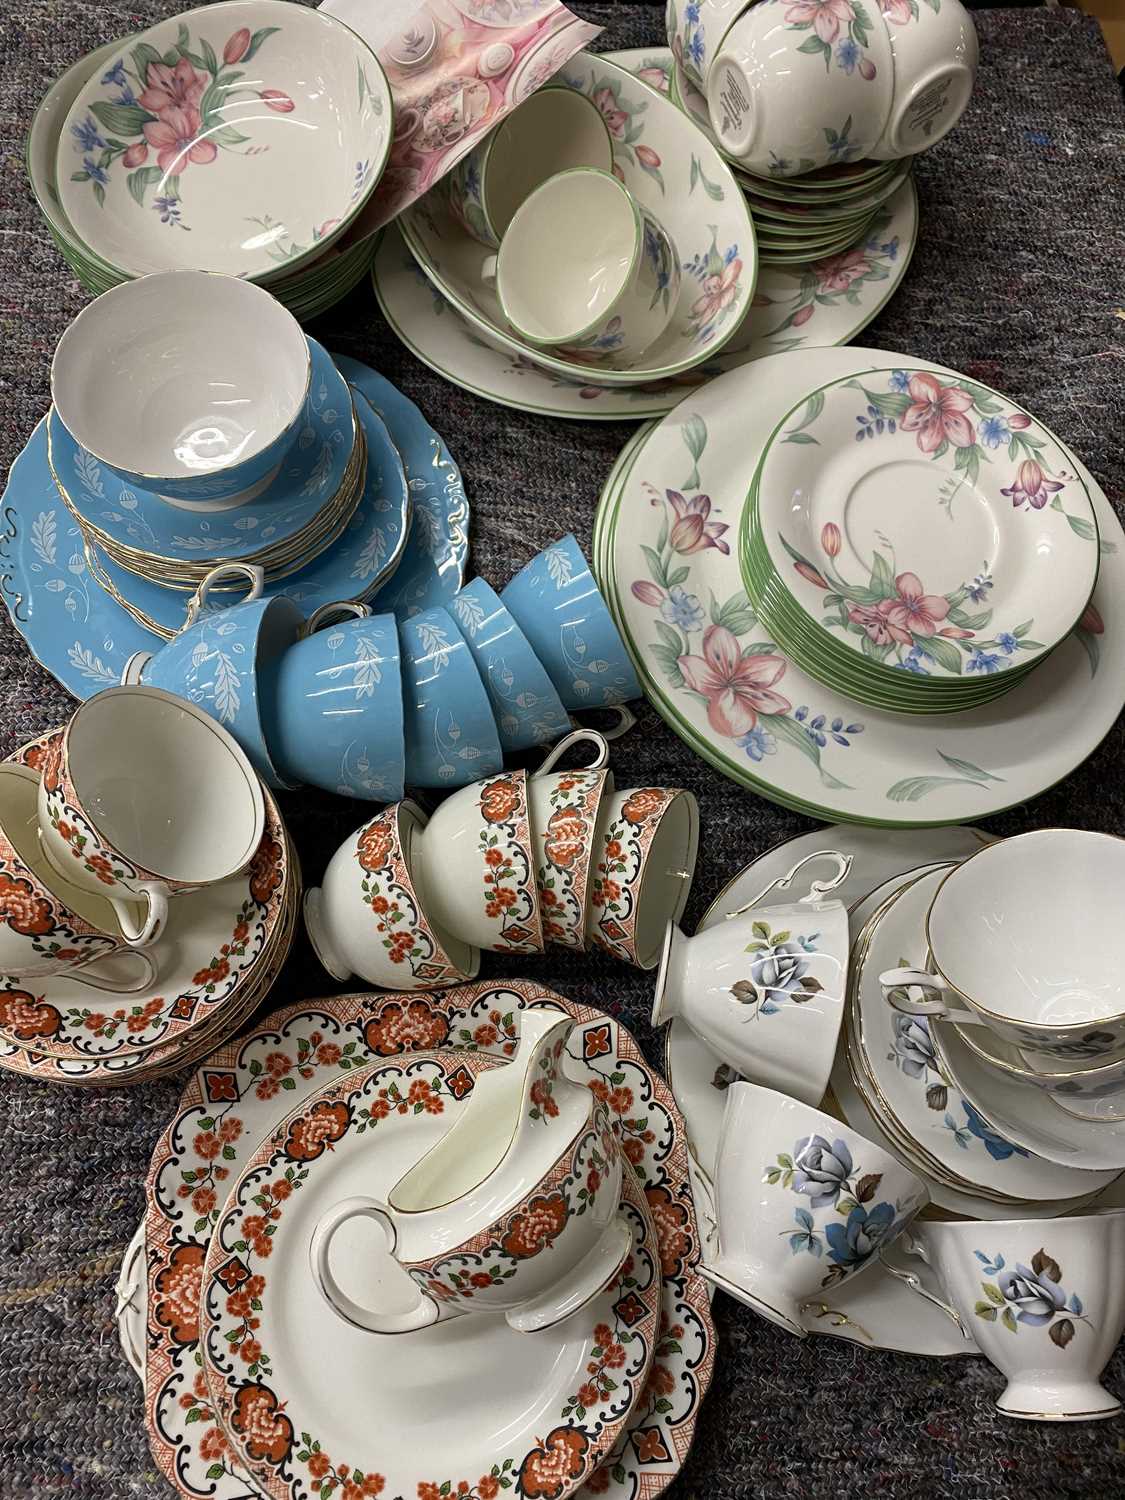 DECORATIVE DINNER & TEAWARE - mixed patterns and manufacturers to include Paragon Blue Mist 17 piece